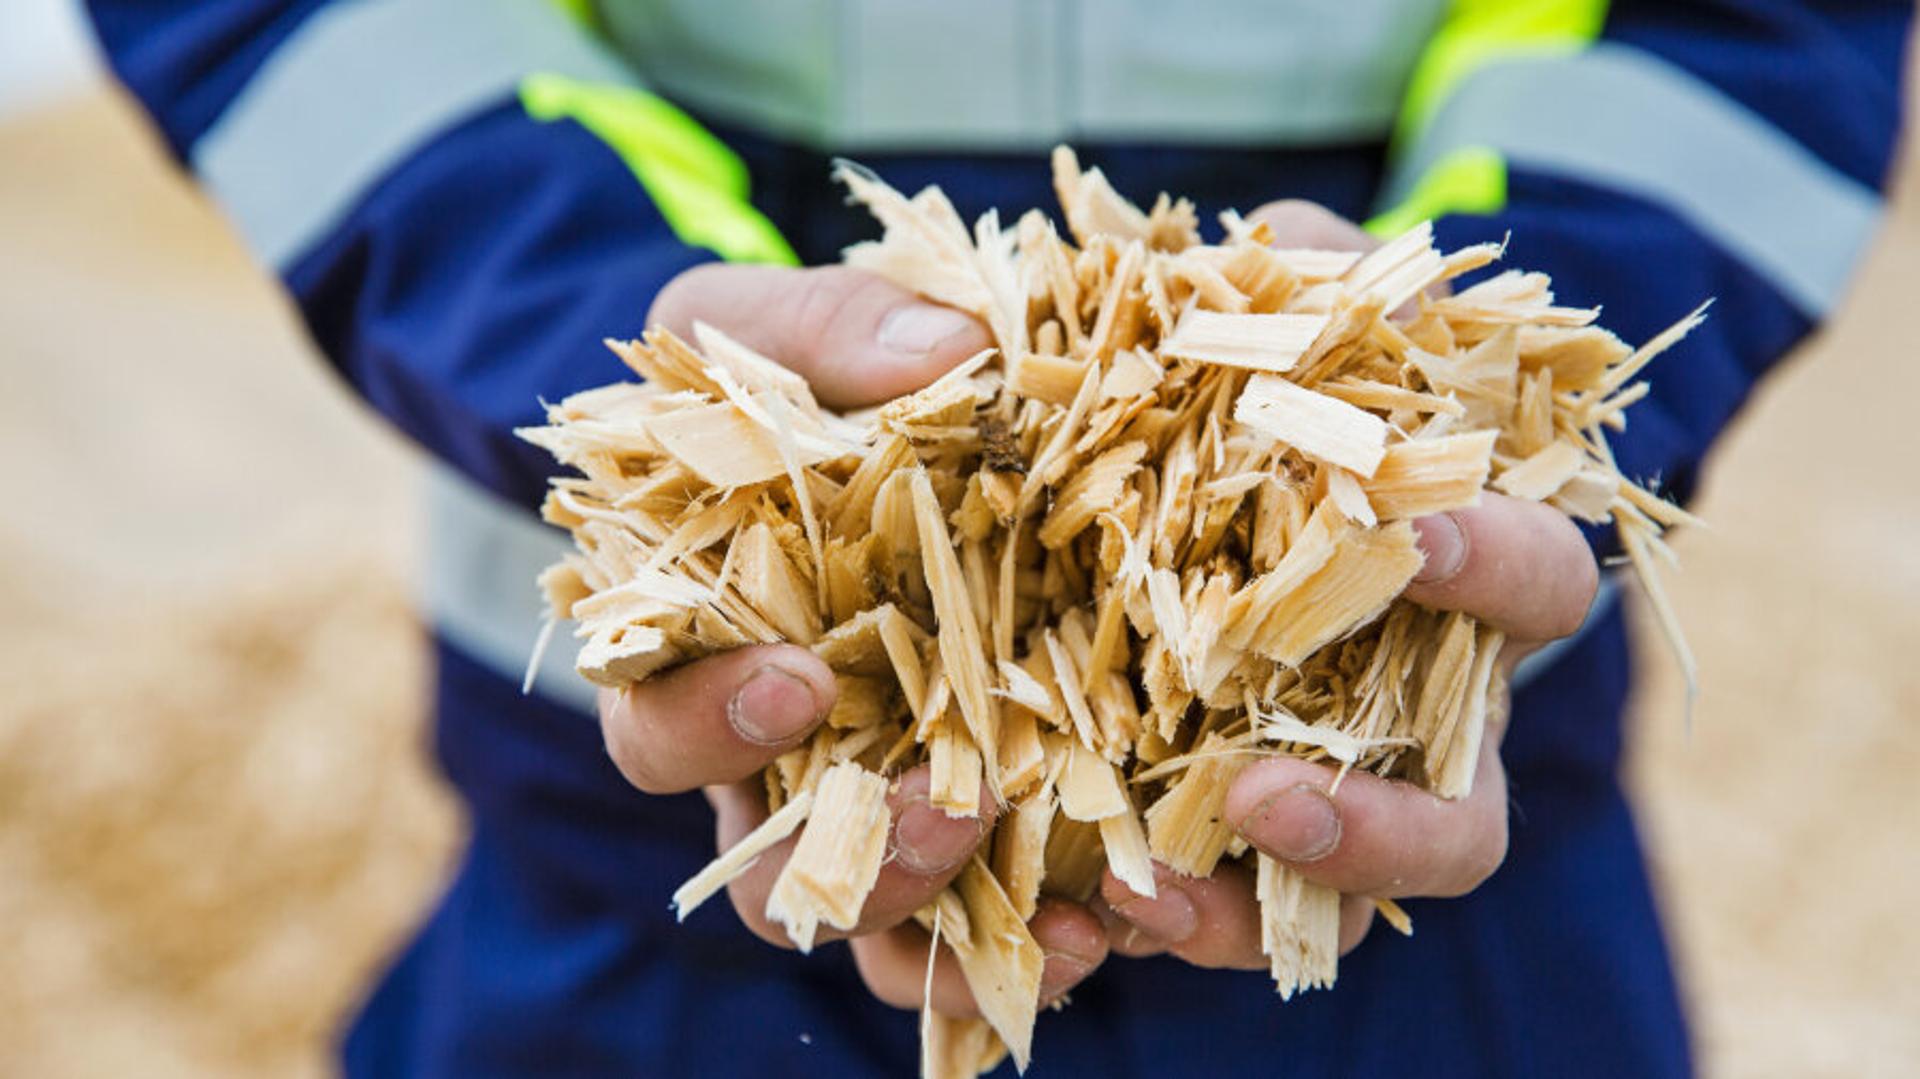 Man with two hands full of wood chips